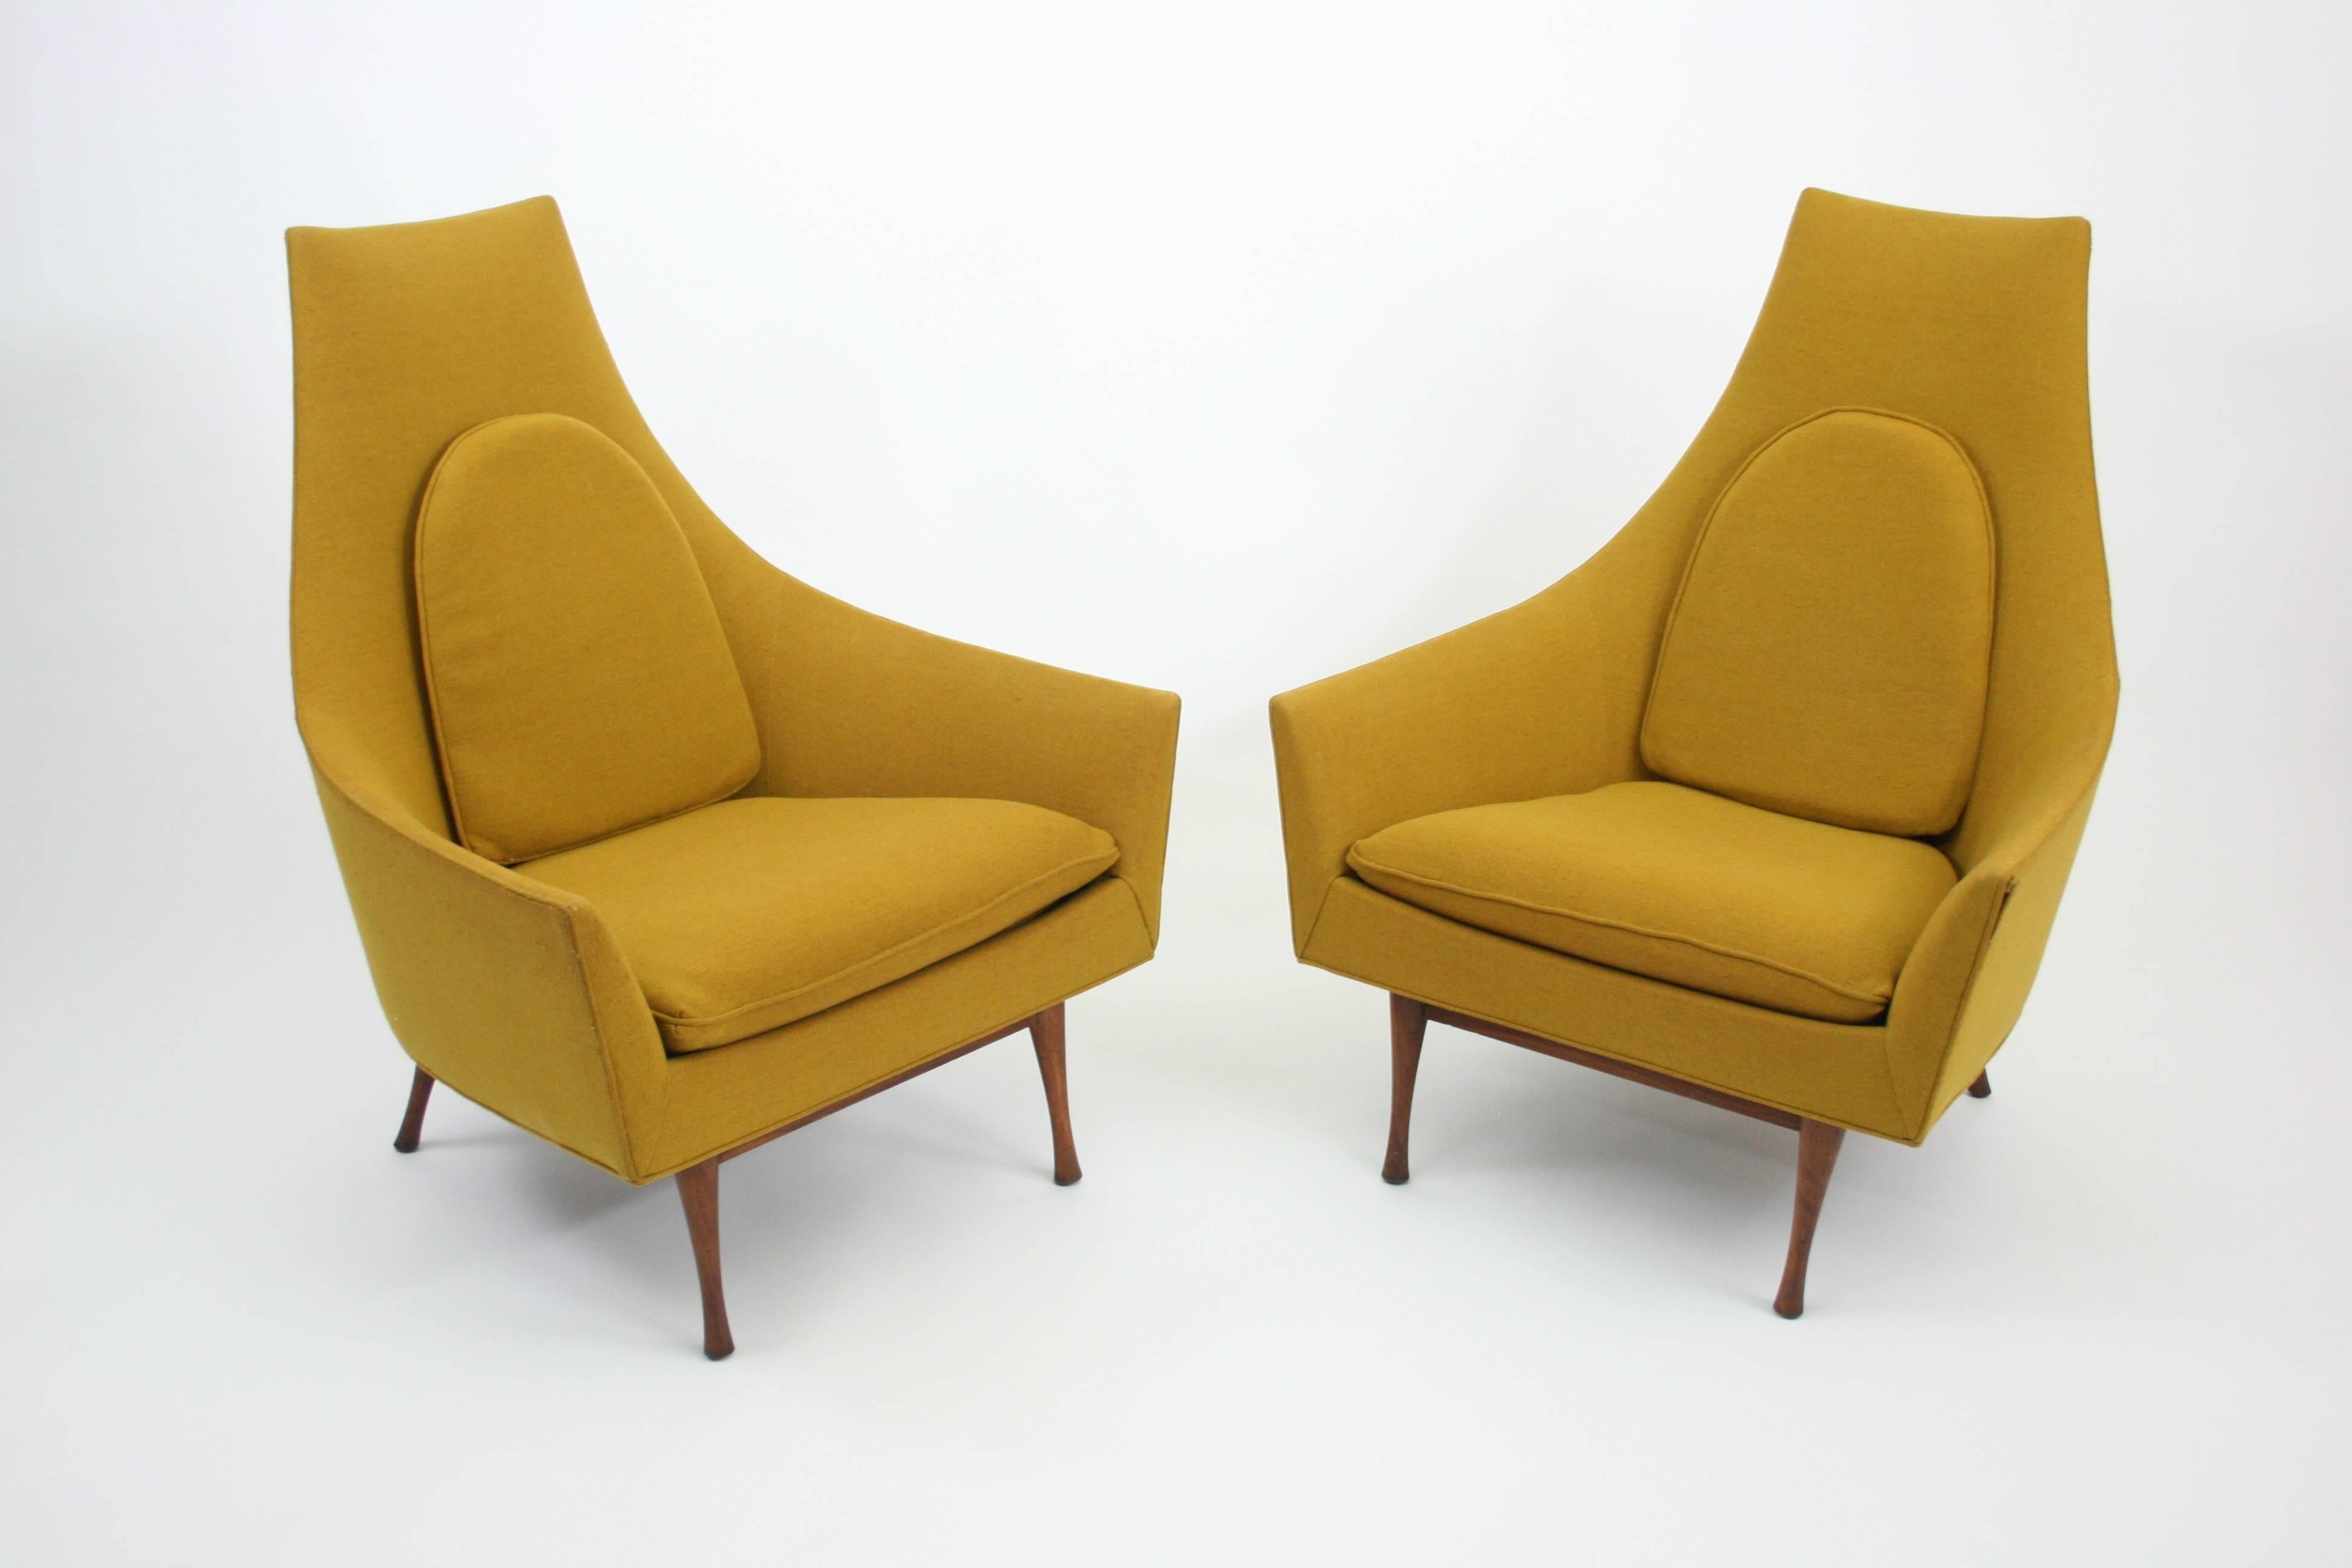 Amazing matched pair of Paul McCobb lounge chairs for Widdicomb Furniture Co. In an original wool fabric, these chairs are nothing short of amazing. Beautiful lines on these sweeping frames that float upon solid walnut legs. Completely solid